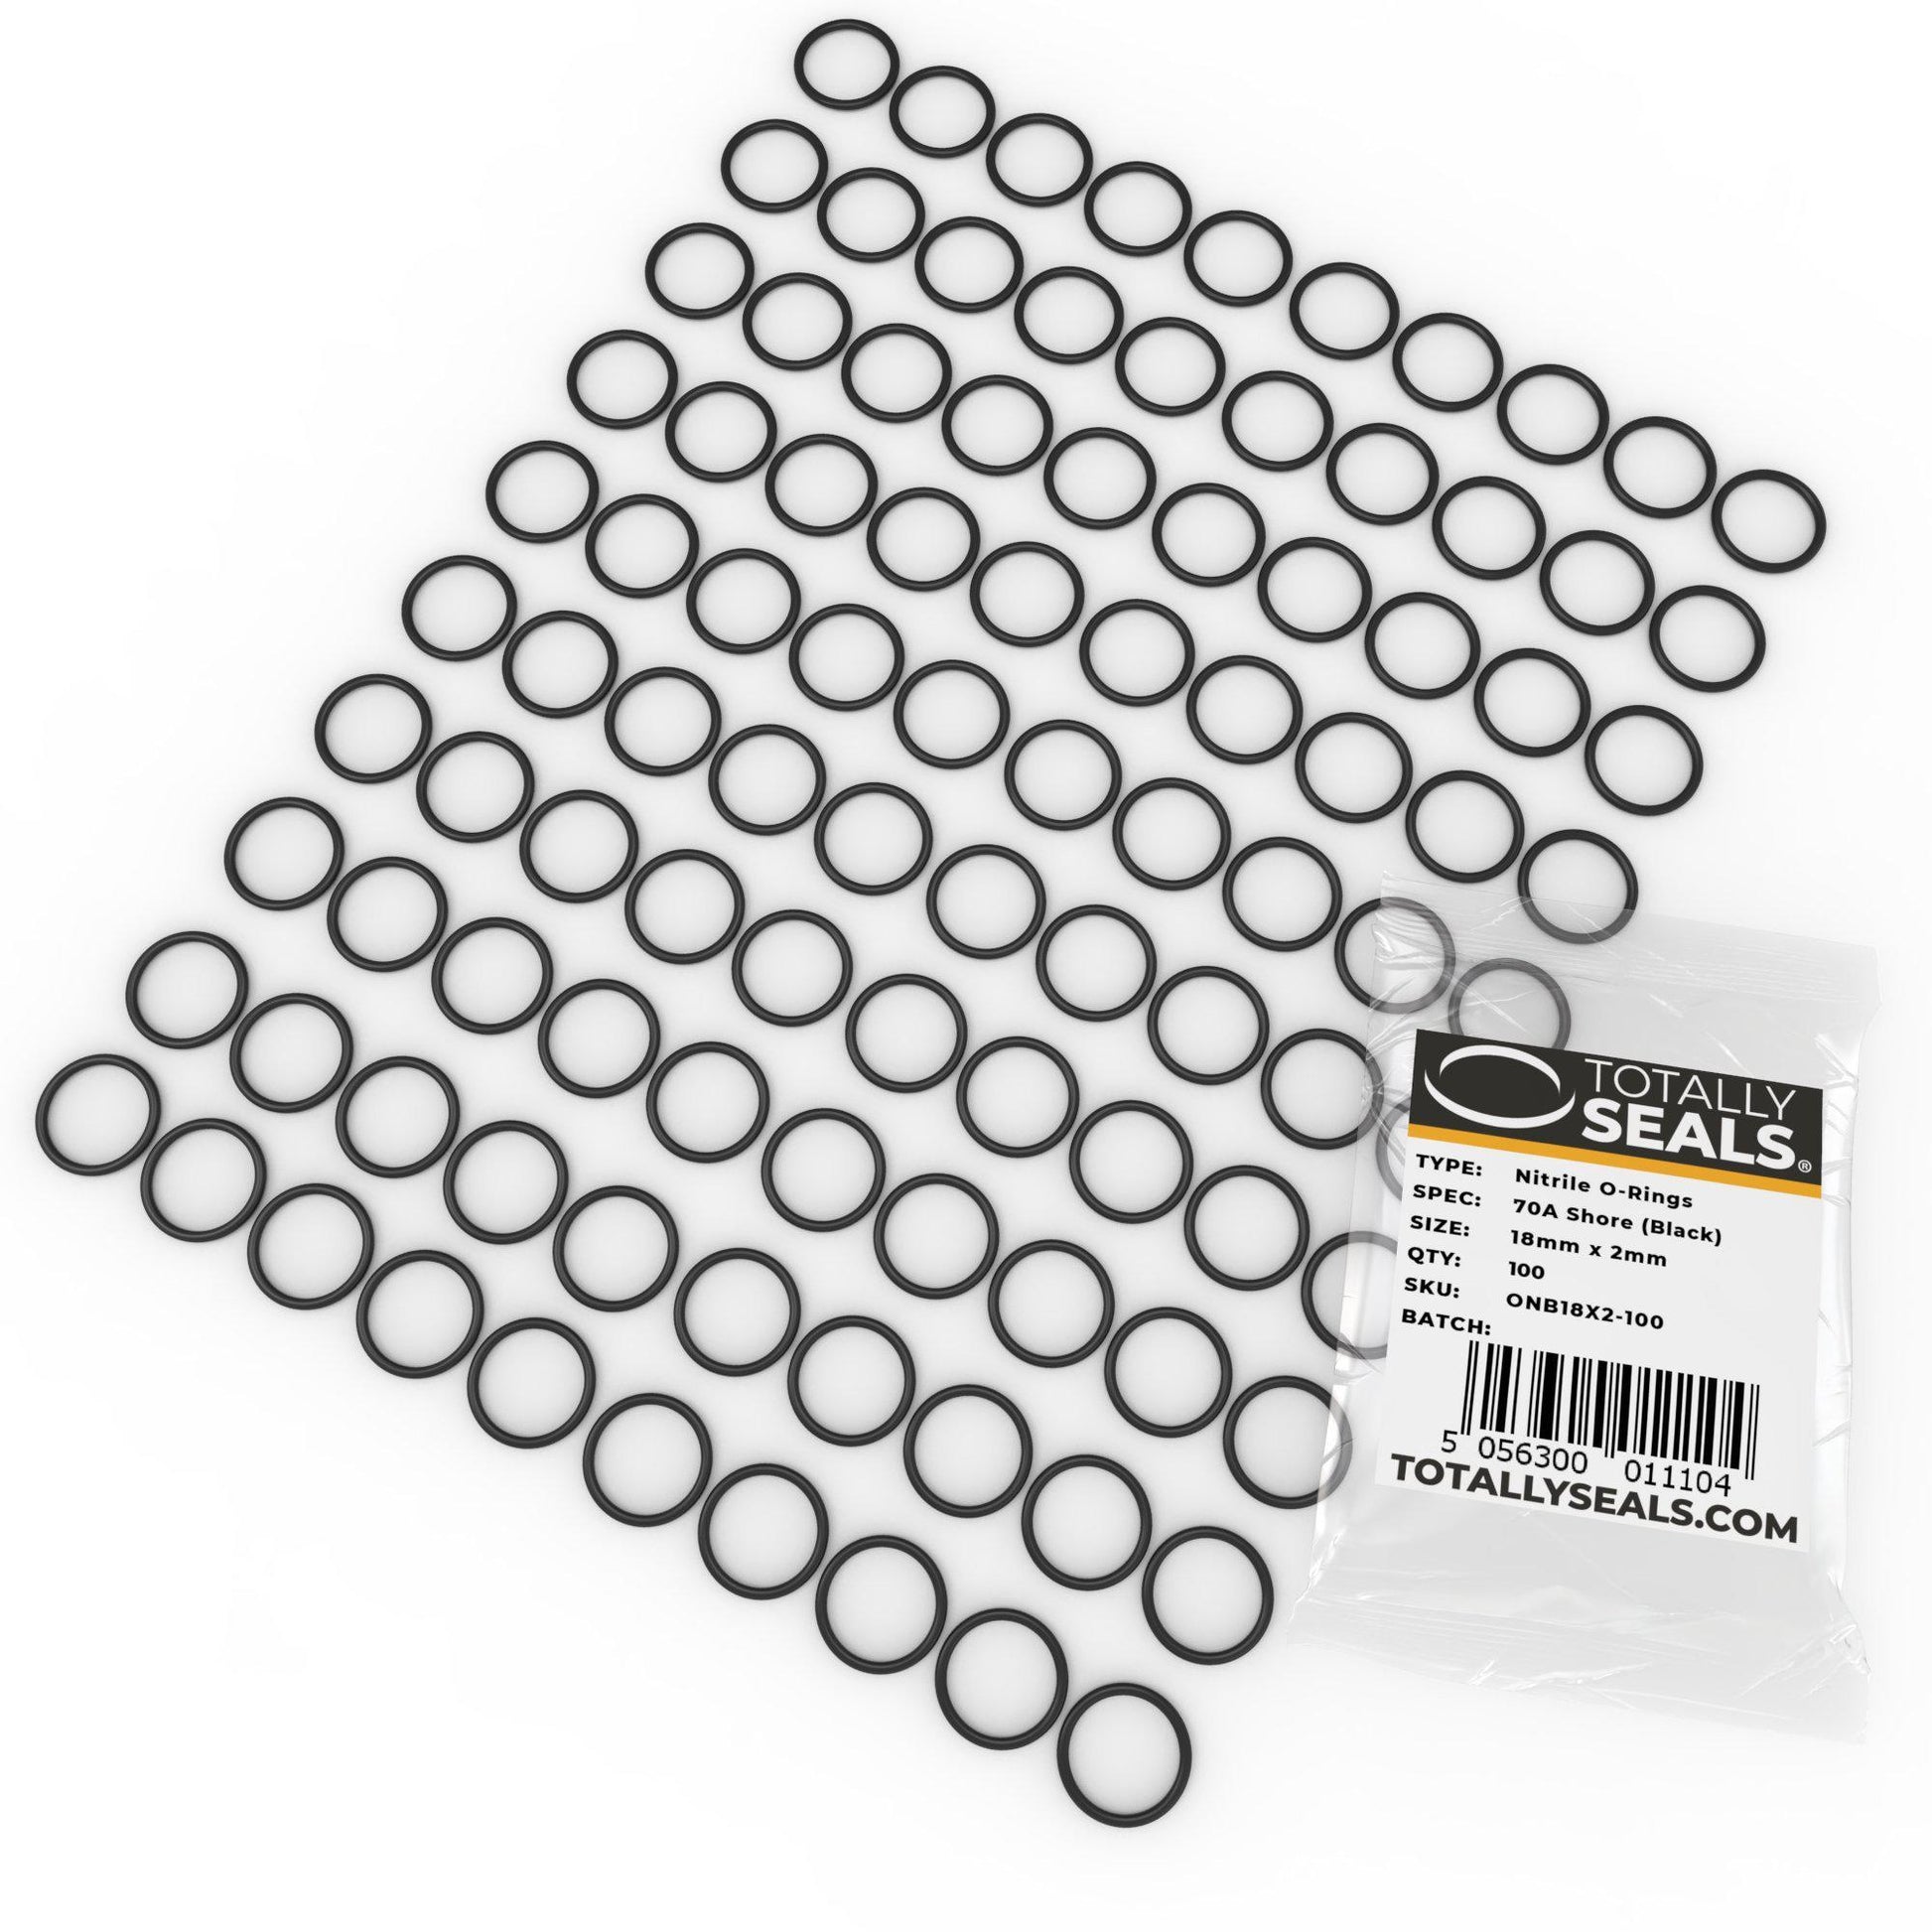 18mm x 2mm (22mm OD) Nitrile O-Rings - Totally Seals®